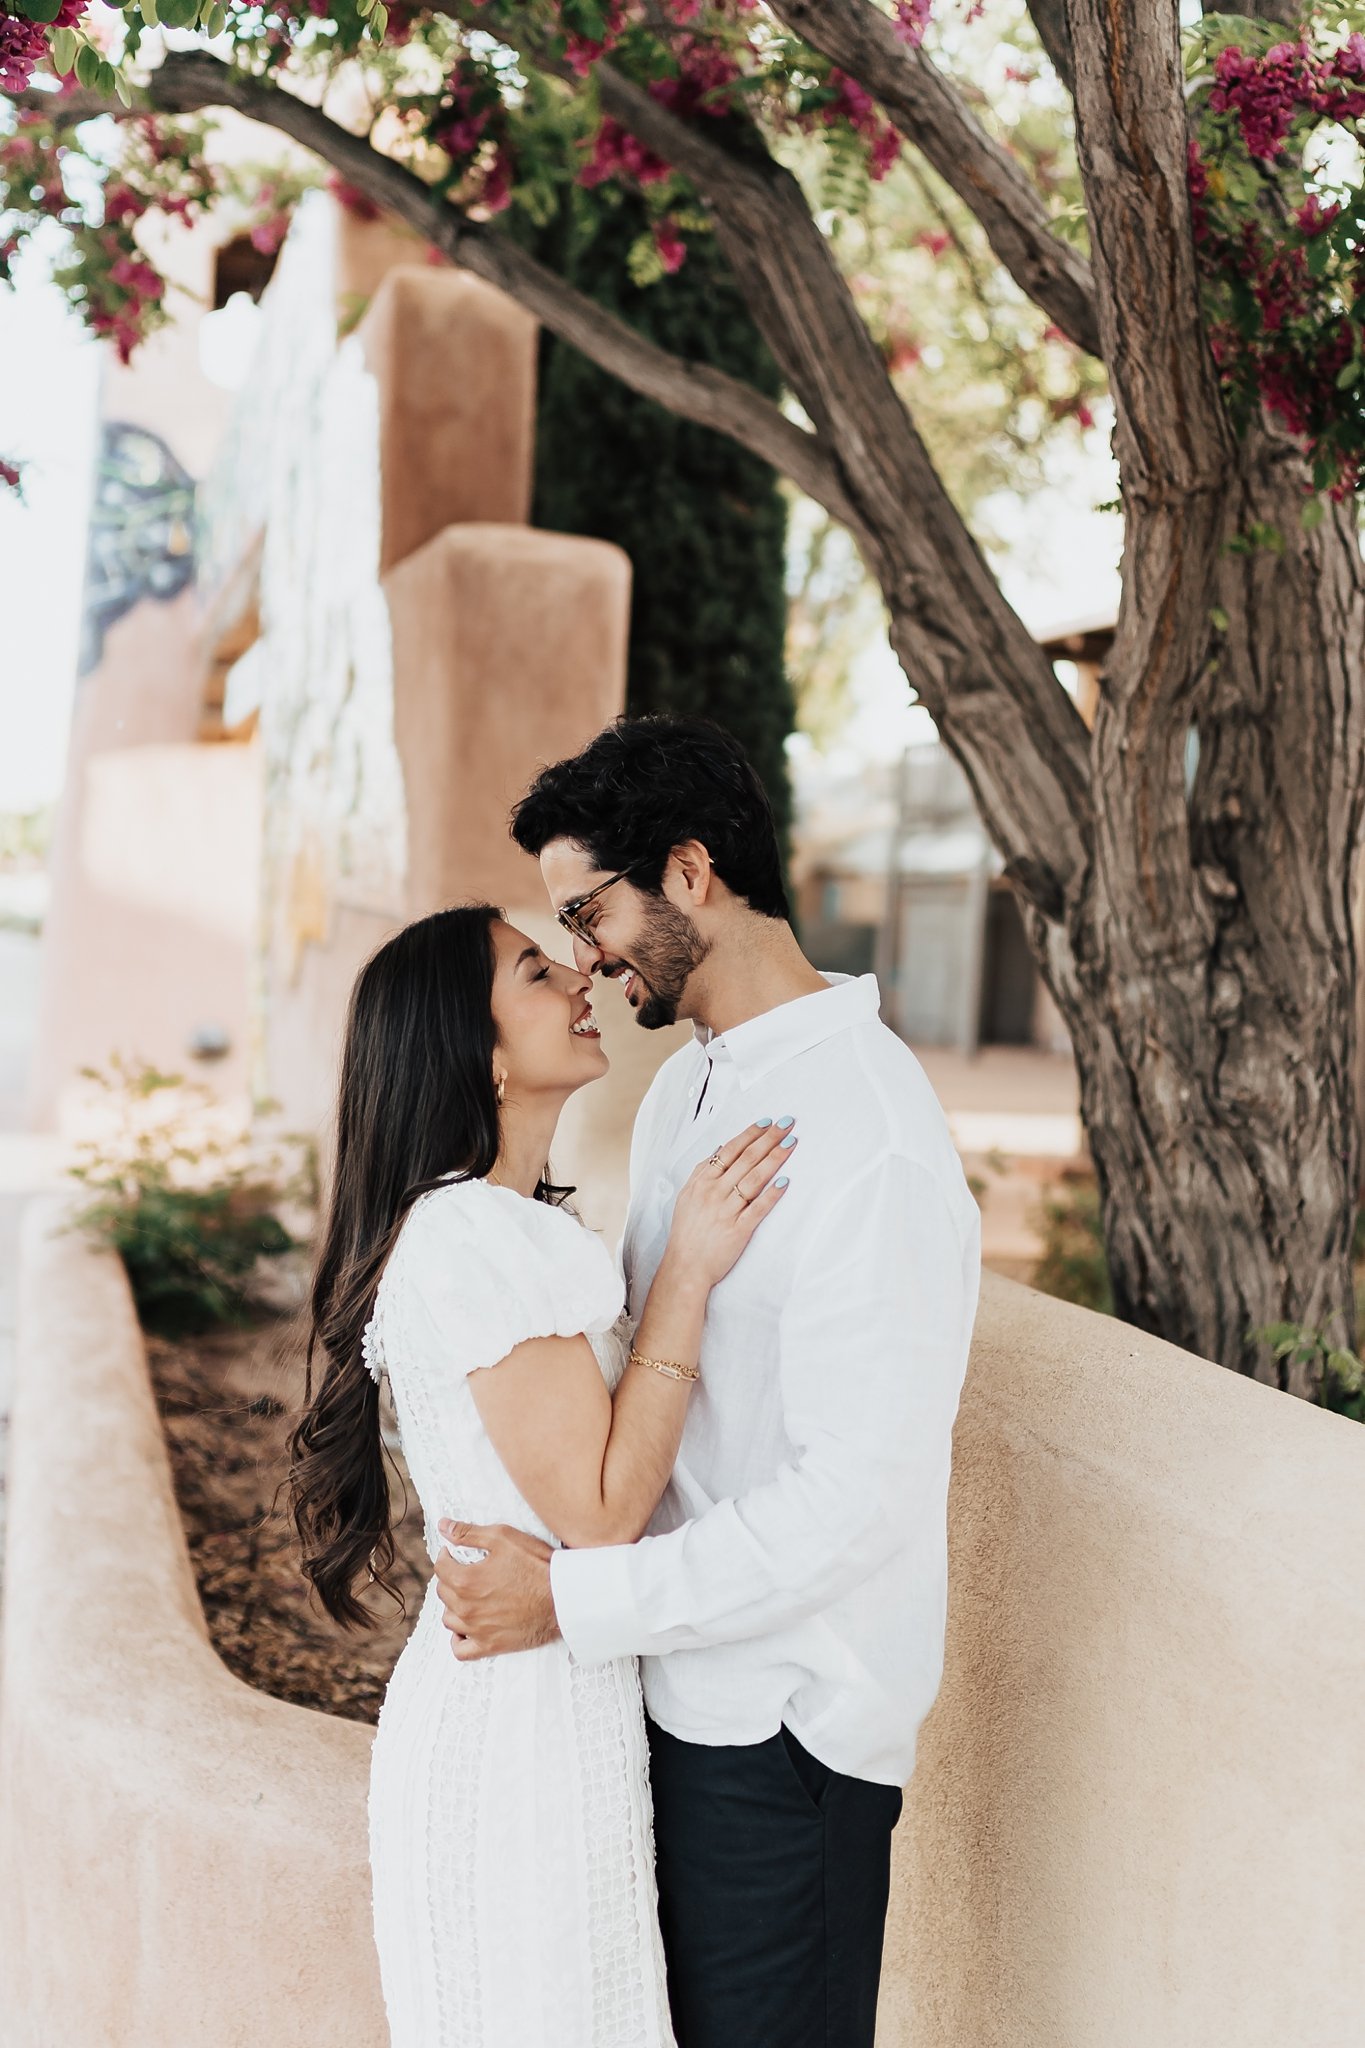 Alicia+lucia+photography+-+albuquerque+wedding+photographer+-+santa+fe+wedding+photography+-+new+mexico+wedding+photographer+-+new+mexico+wedding+-+old+town+engagement+-+old+town+wedding+-+southwest+engagement_0026.jpg